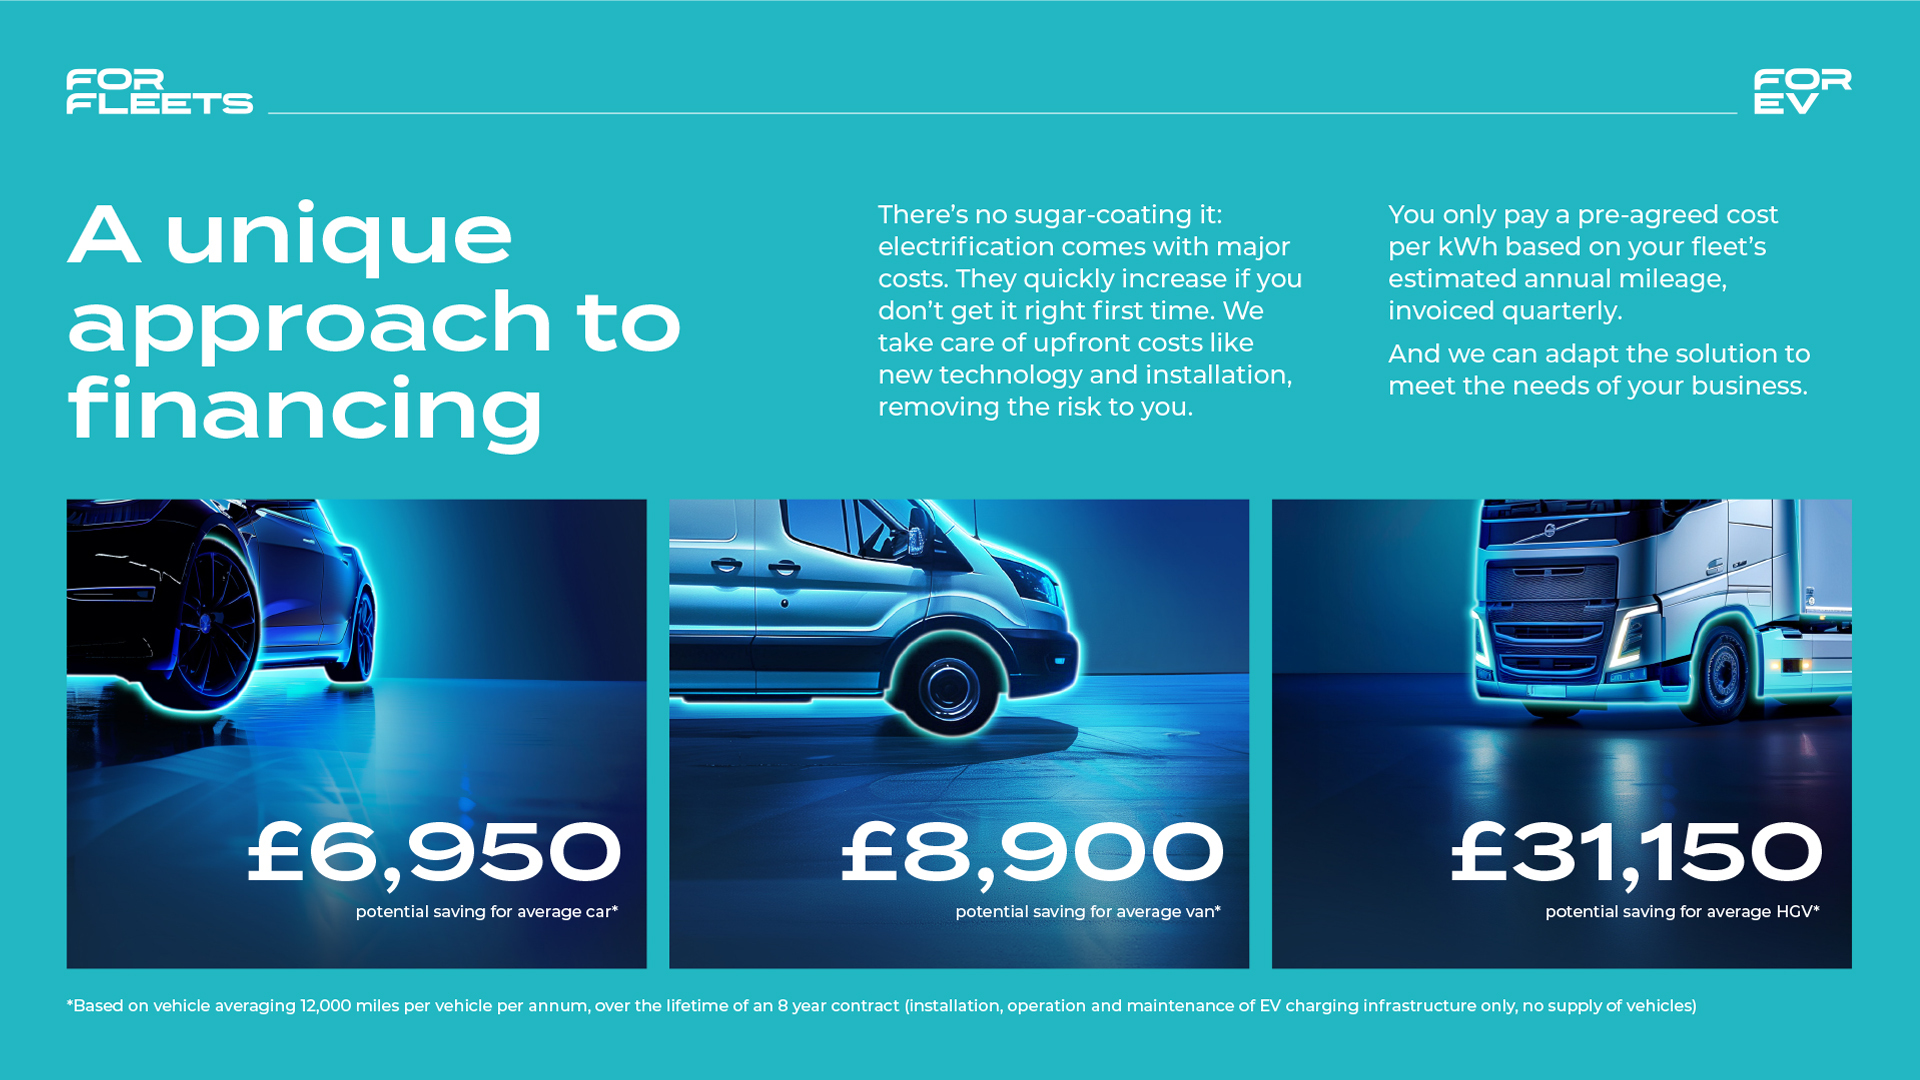 FOR Fleets – We make your fleet electrification simple, rewarding and risk-free